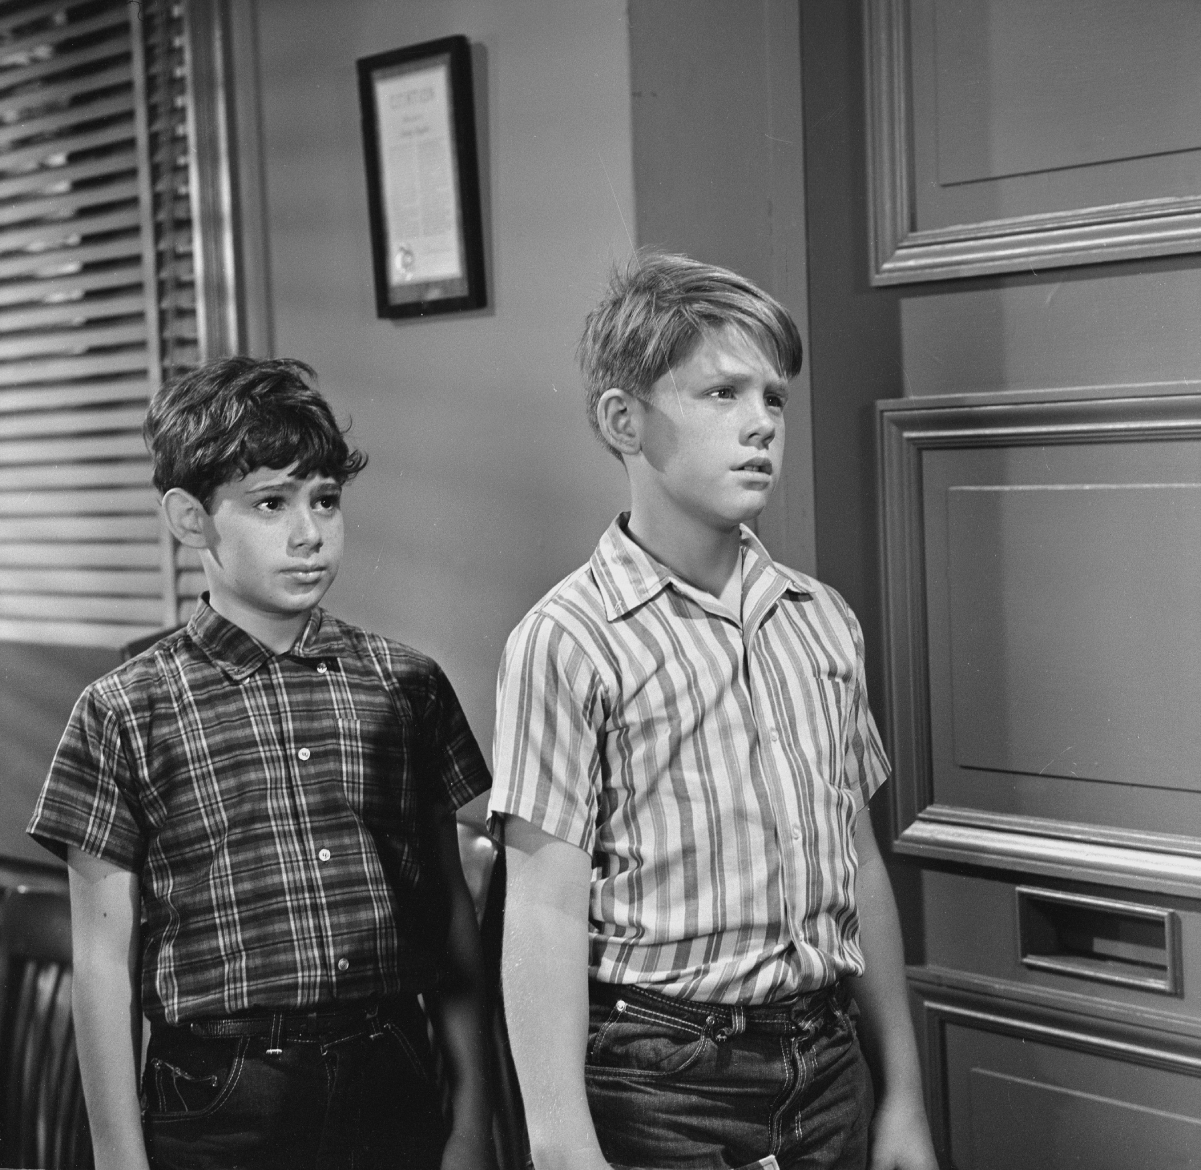 Ron Howard (right) on 'The Andy Griffith Show'